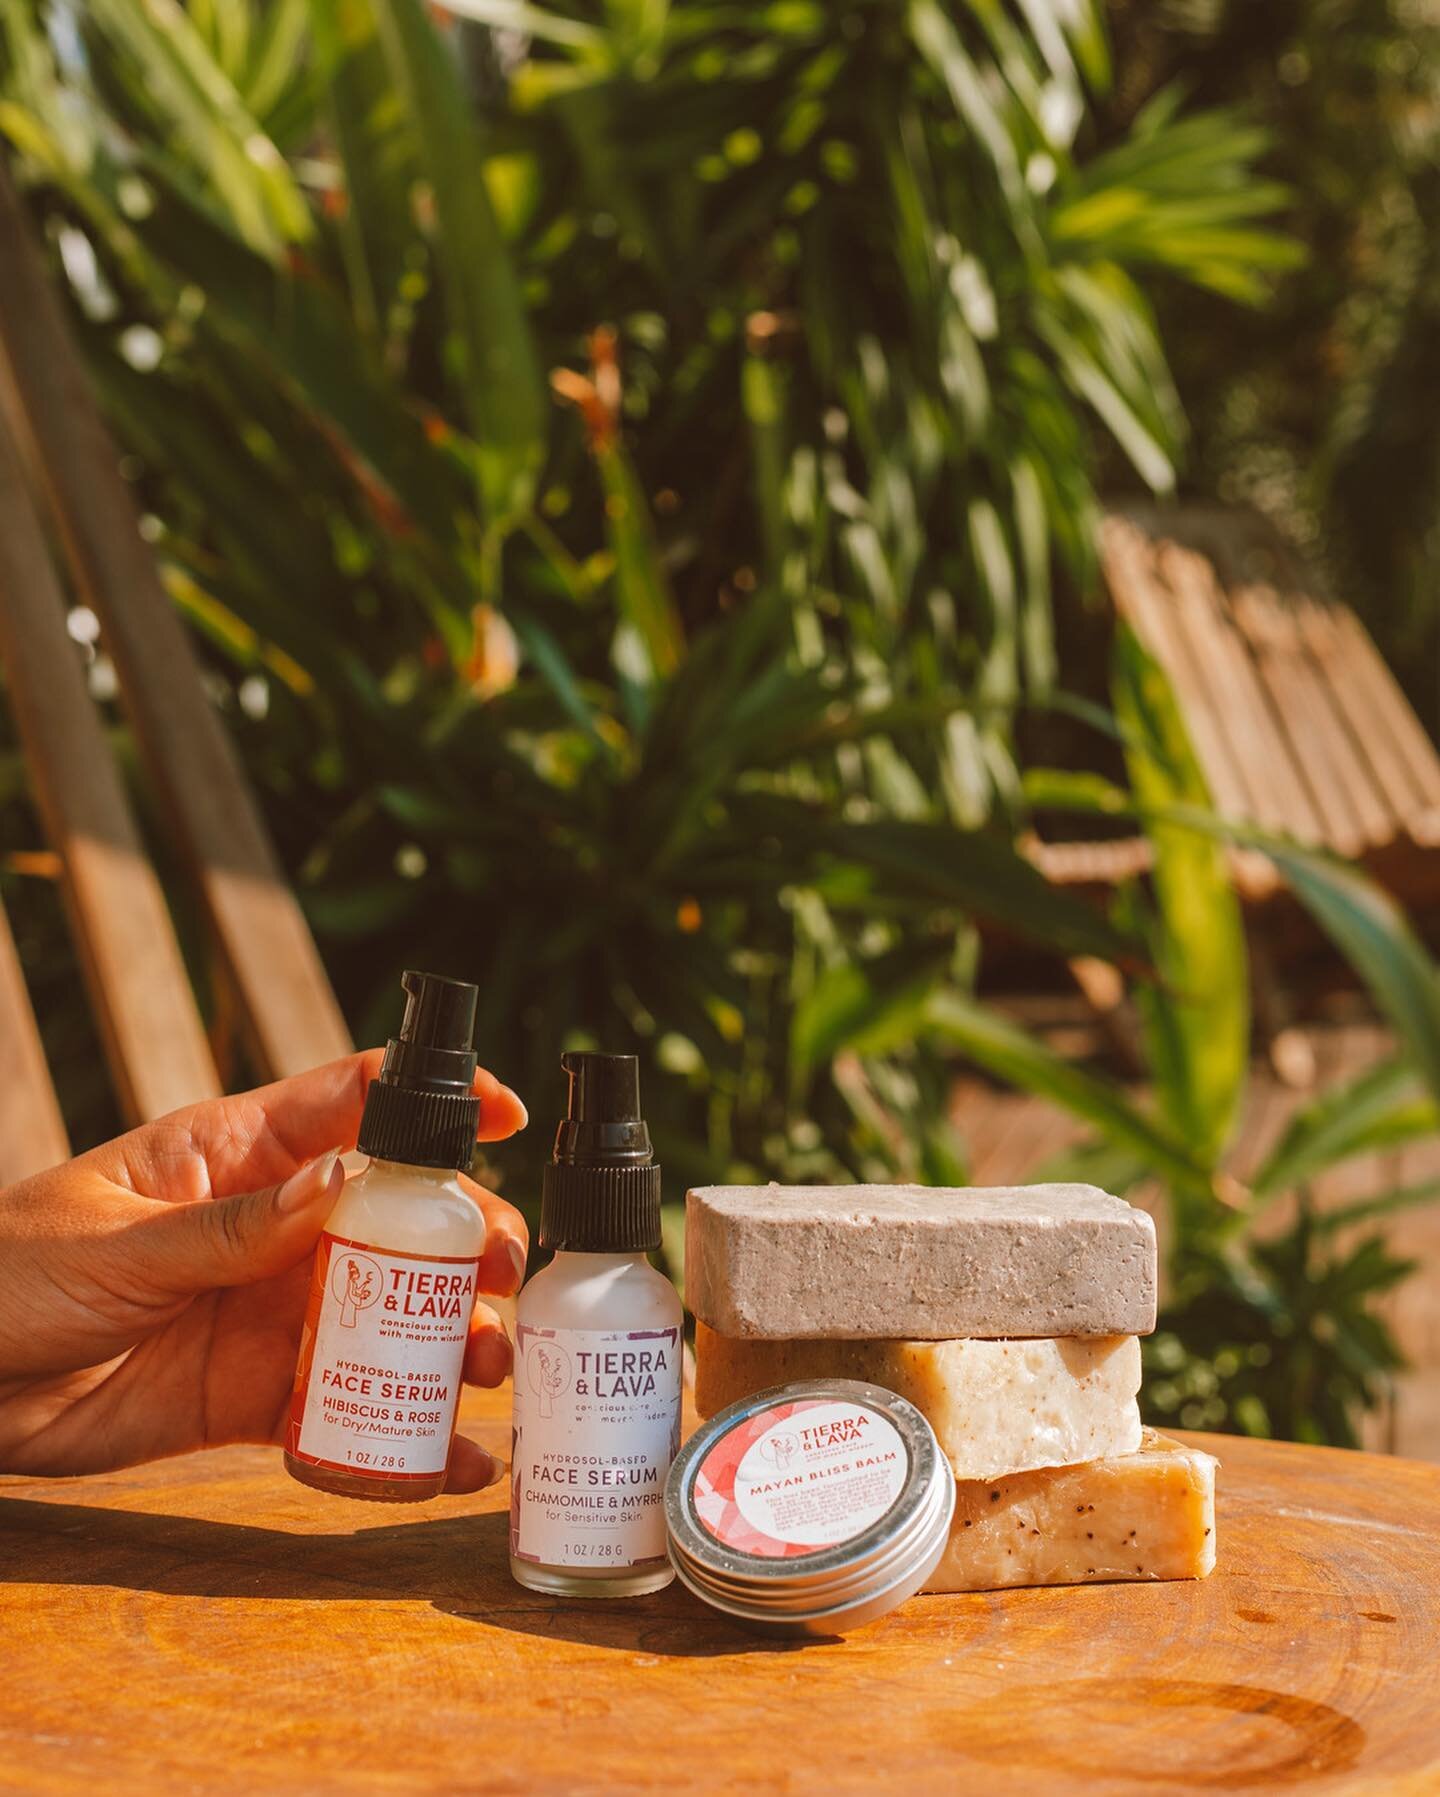 What do all our products have in common? They are free of animal testing, palm oil, artificial colorants and fragrances, mystery ingredients, sulfates and detergents, parabens and phthalates, and genetically modified ingredients. 
⠀⠀⠀⠀⠀⠀⠀⠀⠀
Check out